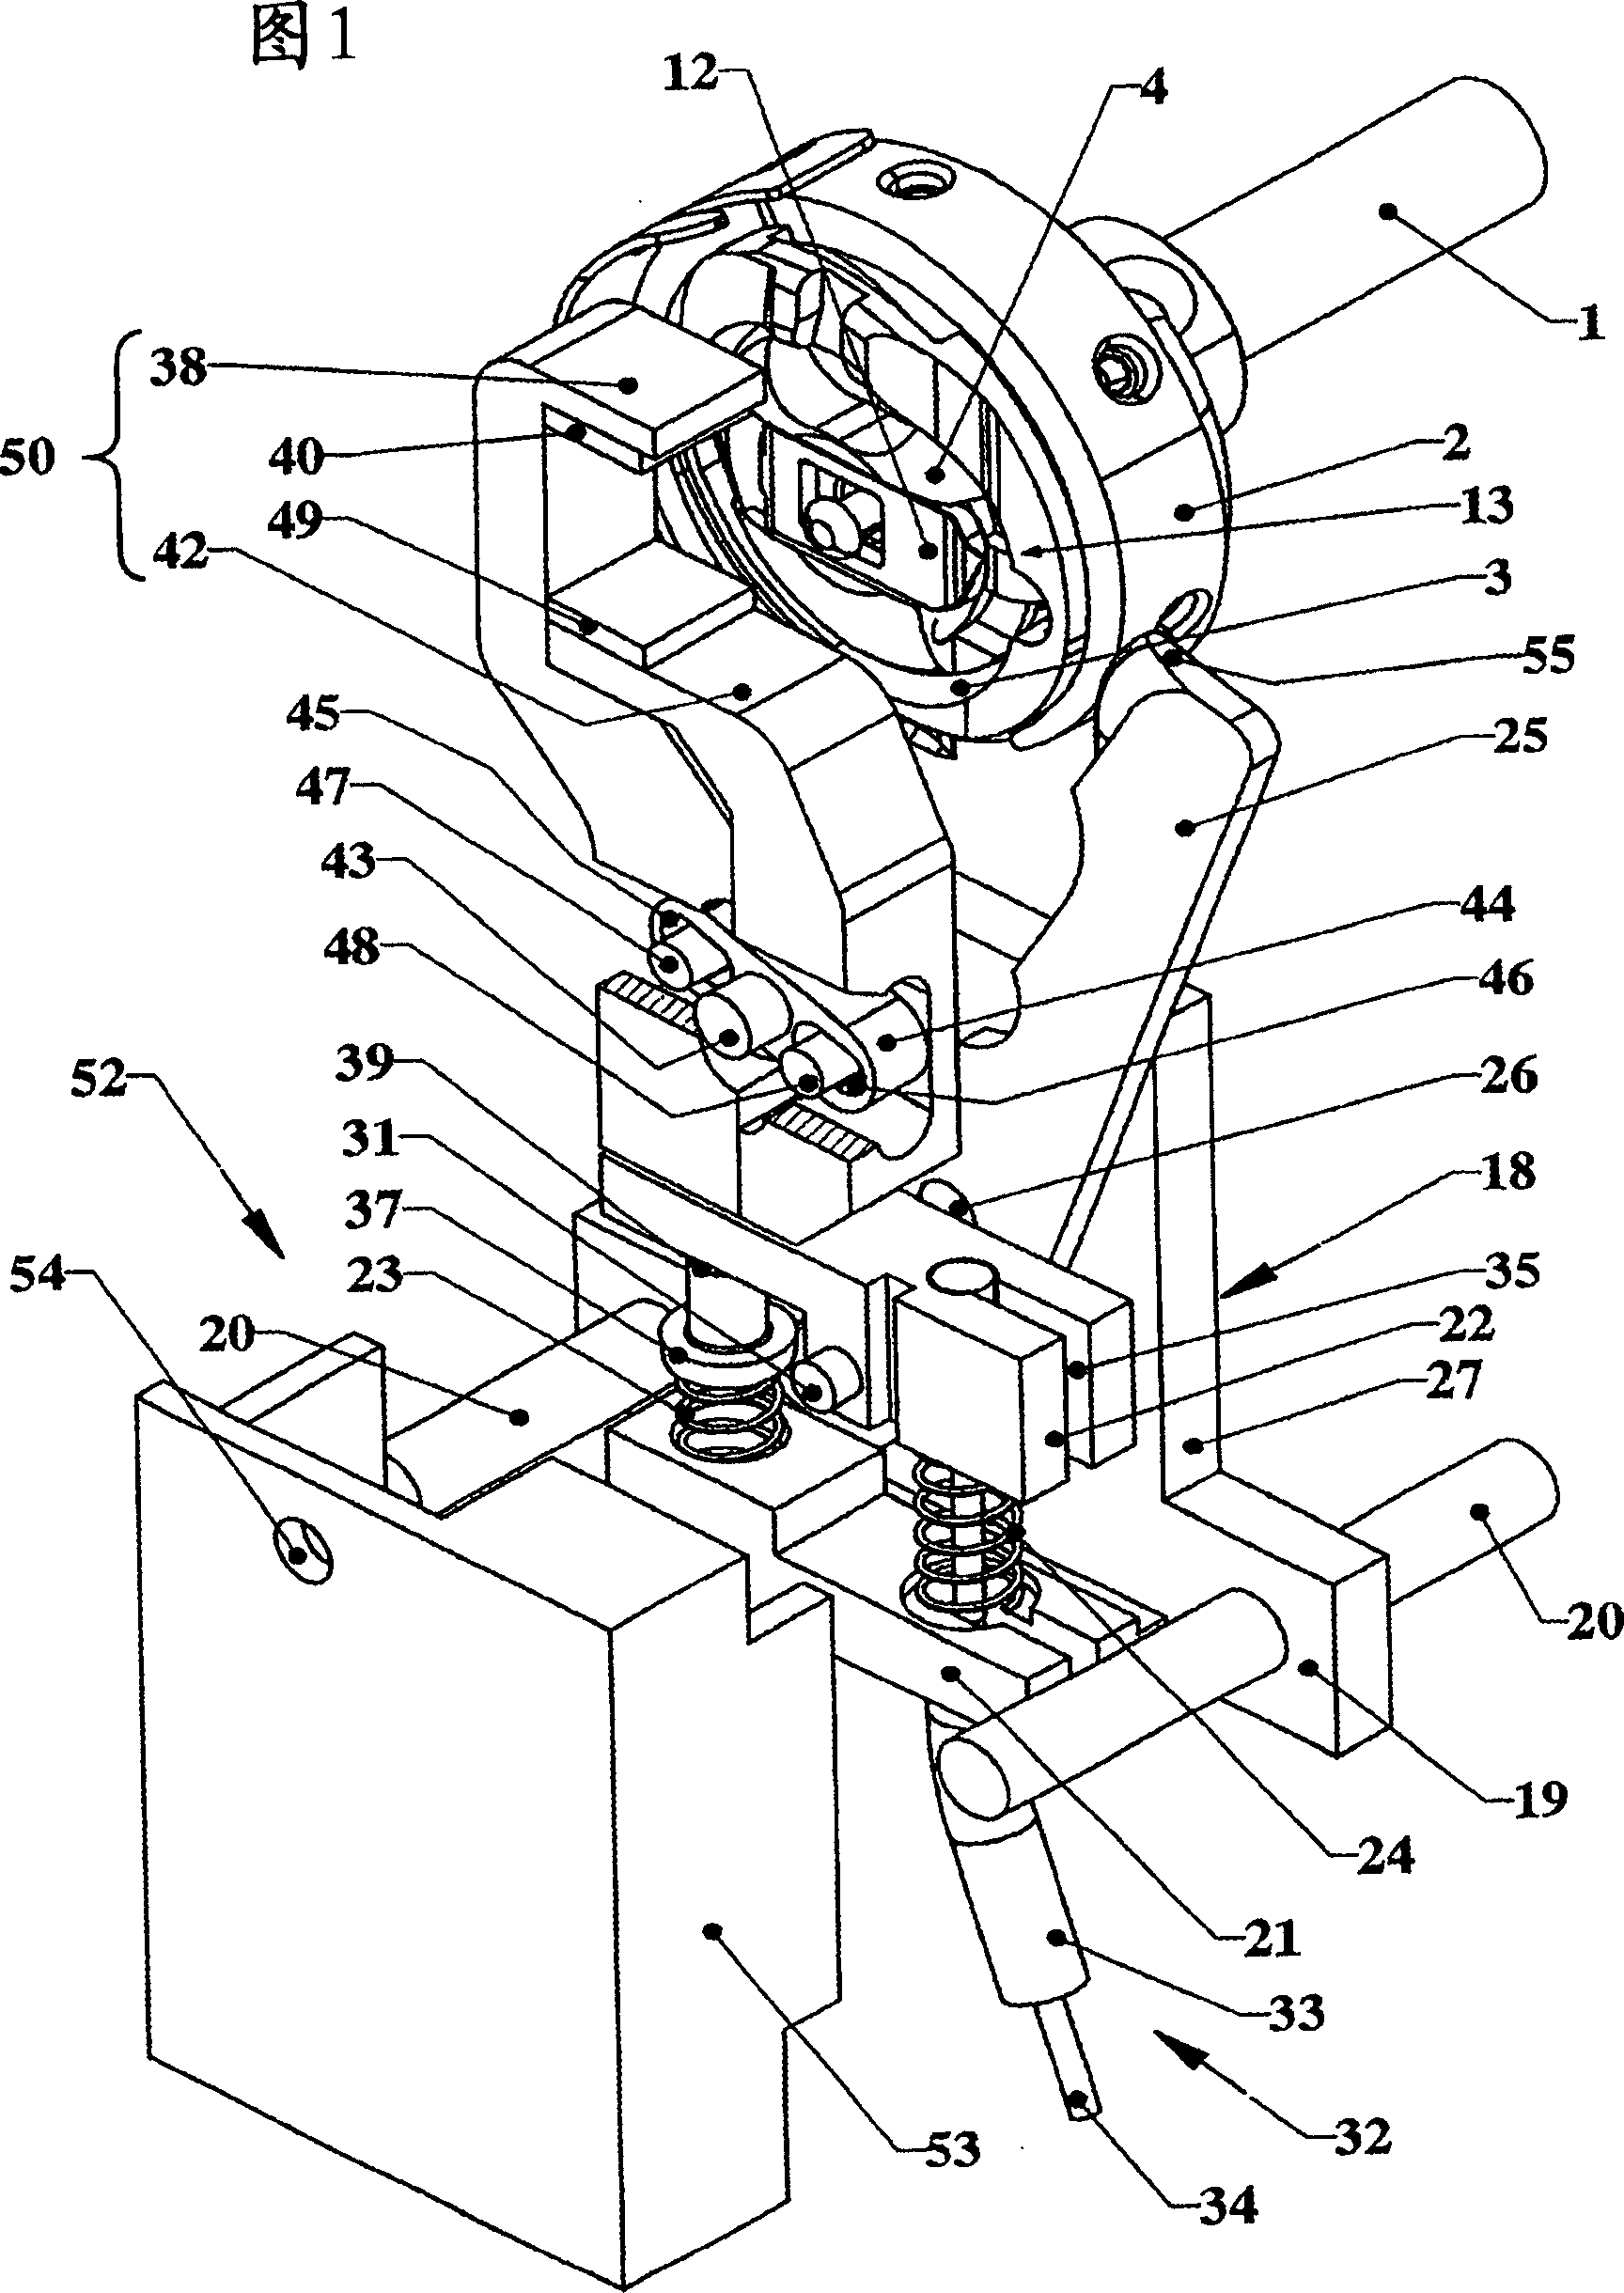 Device for sewing or knitting machines for changing the spool for the looper thread